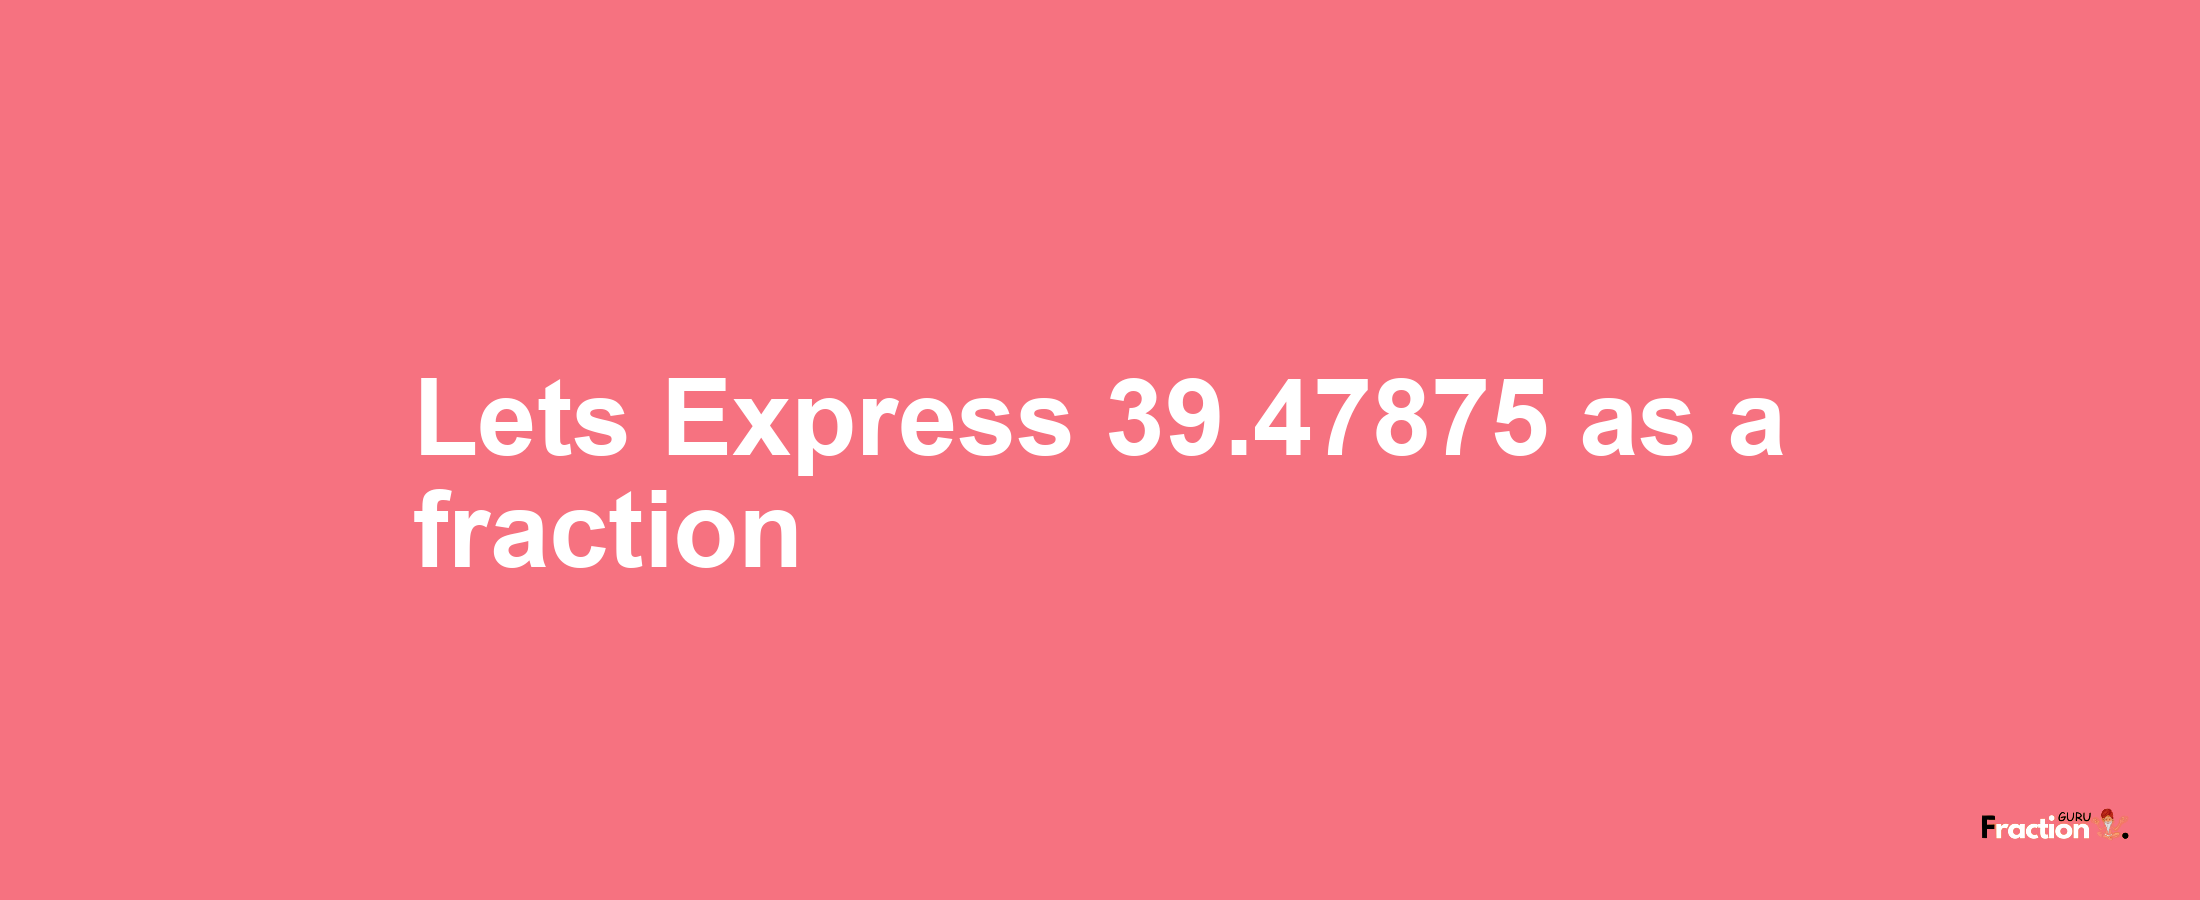 Lets Express 39.47875 as afraction